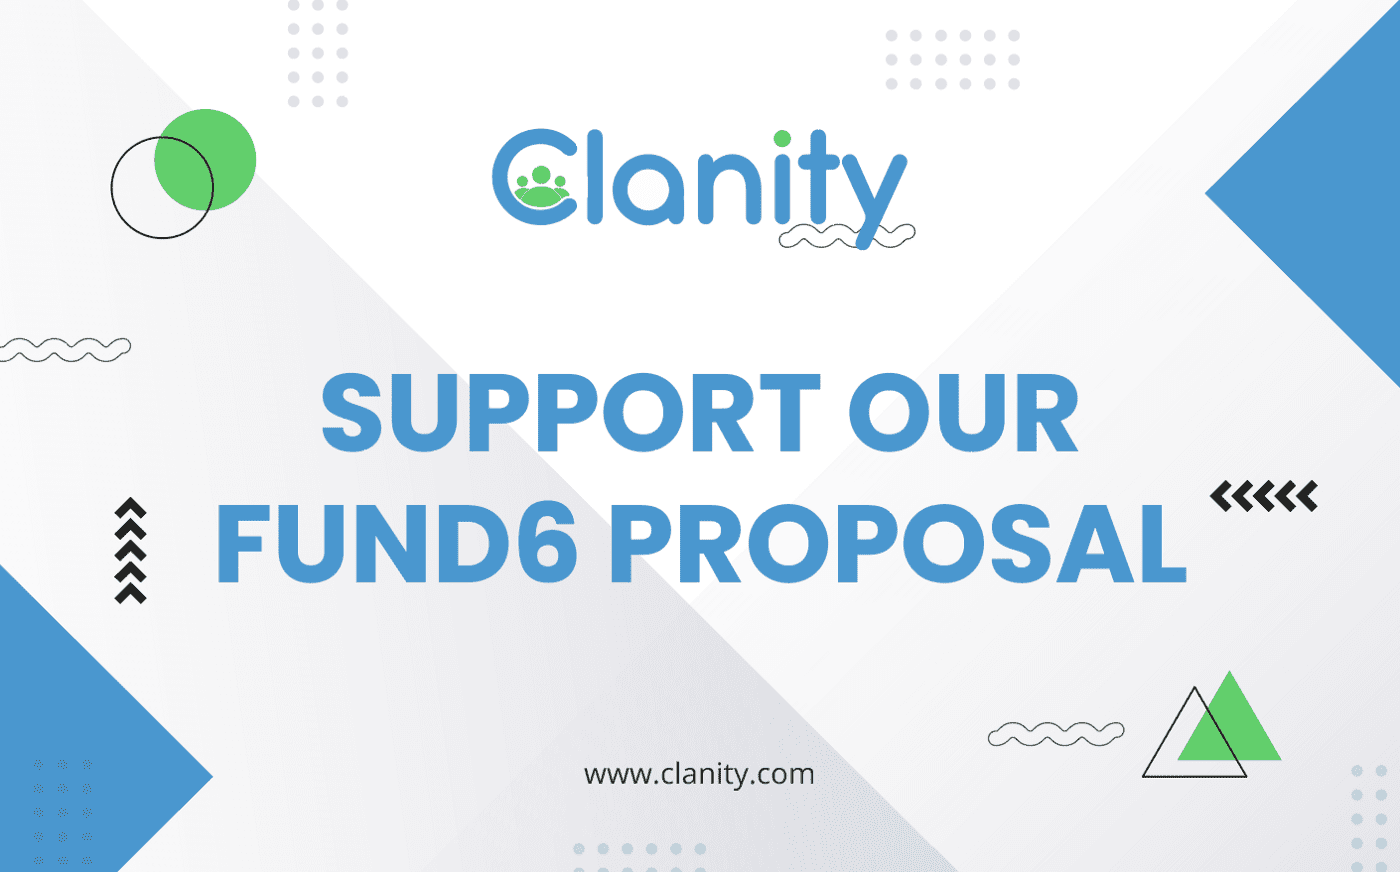 Support our fund6 proposal